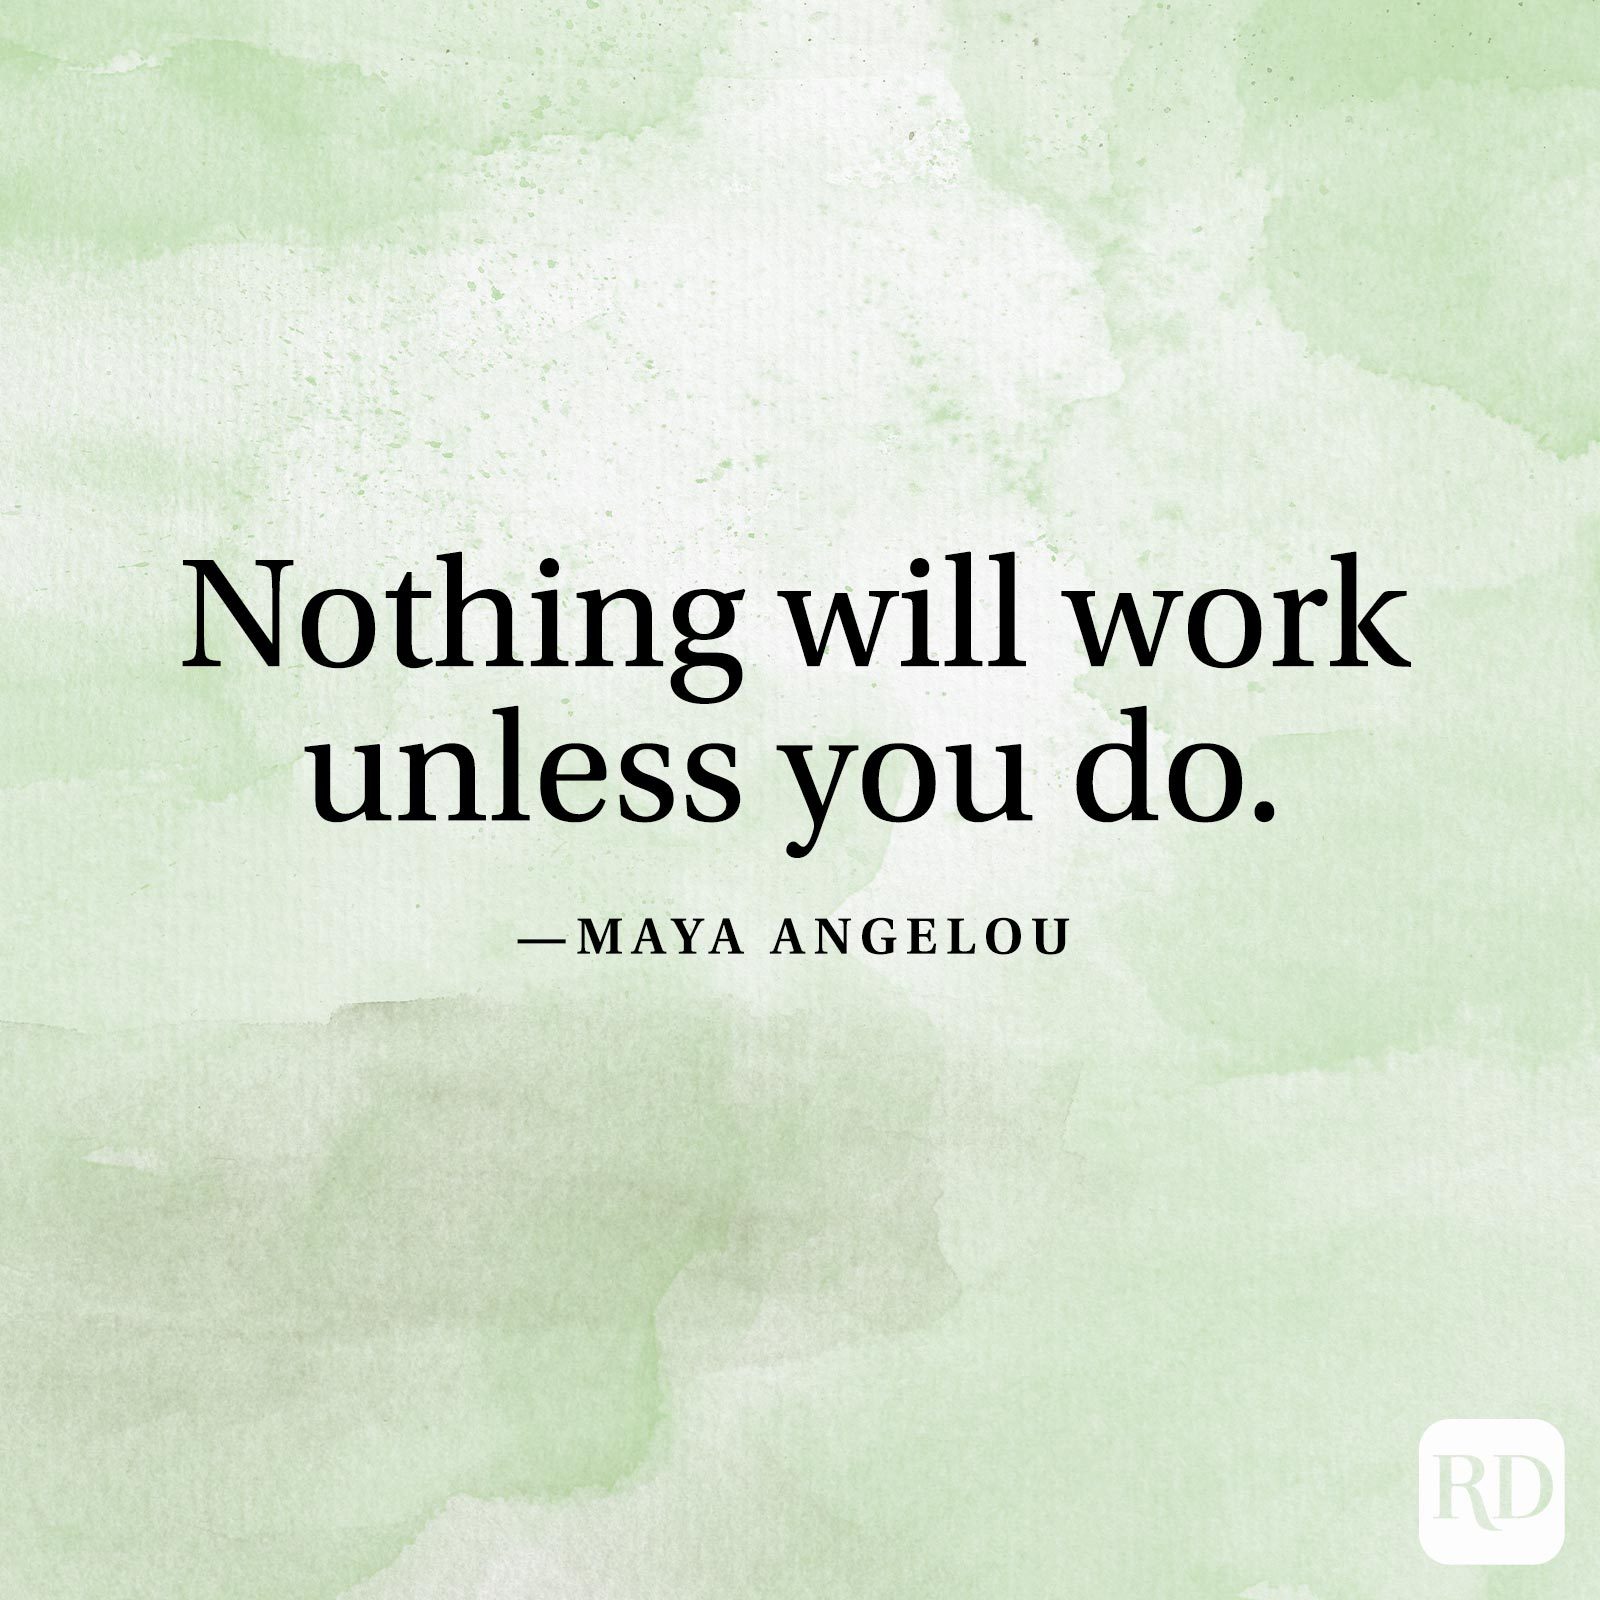 "Nothing will work unless you do." —Maya Angelou